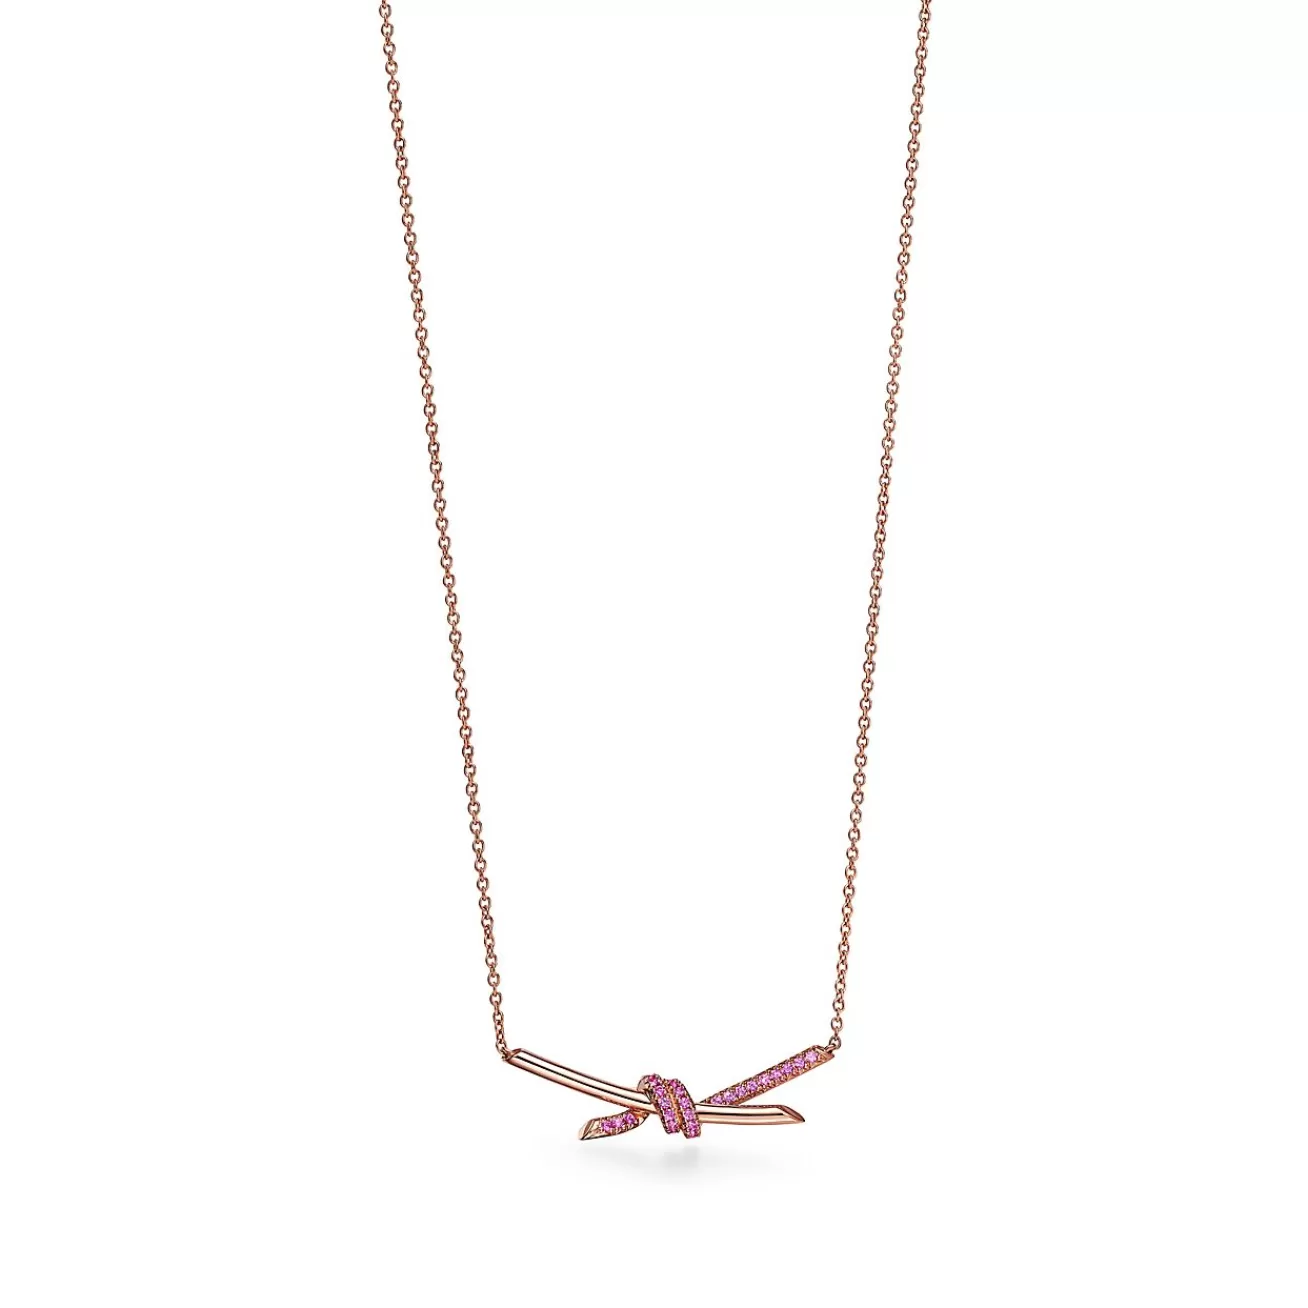 Tiffany & Co. Tiffany Knot Pendant in Rose Gold with Pink Sapphires | ^ Necklaces & Pendants | Gifts for Her